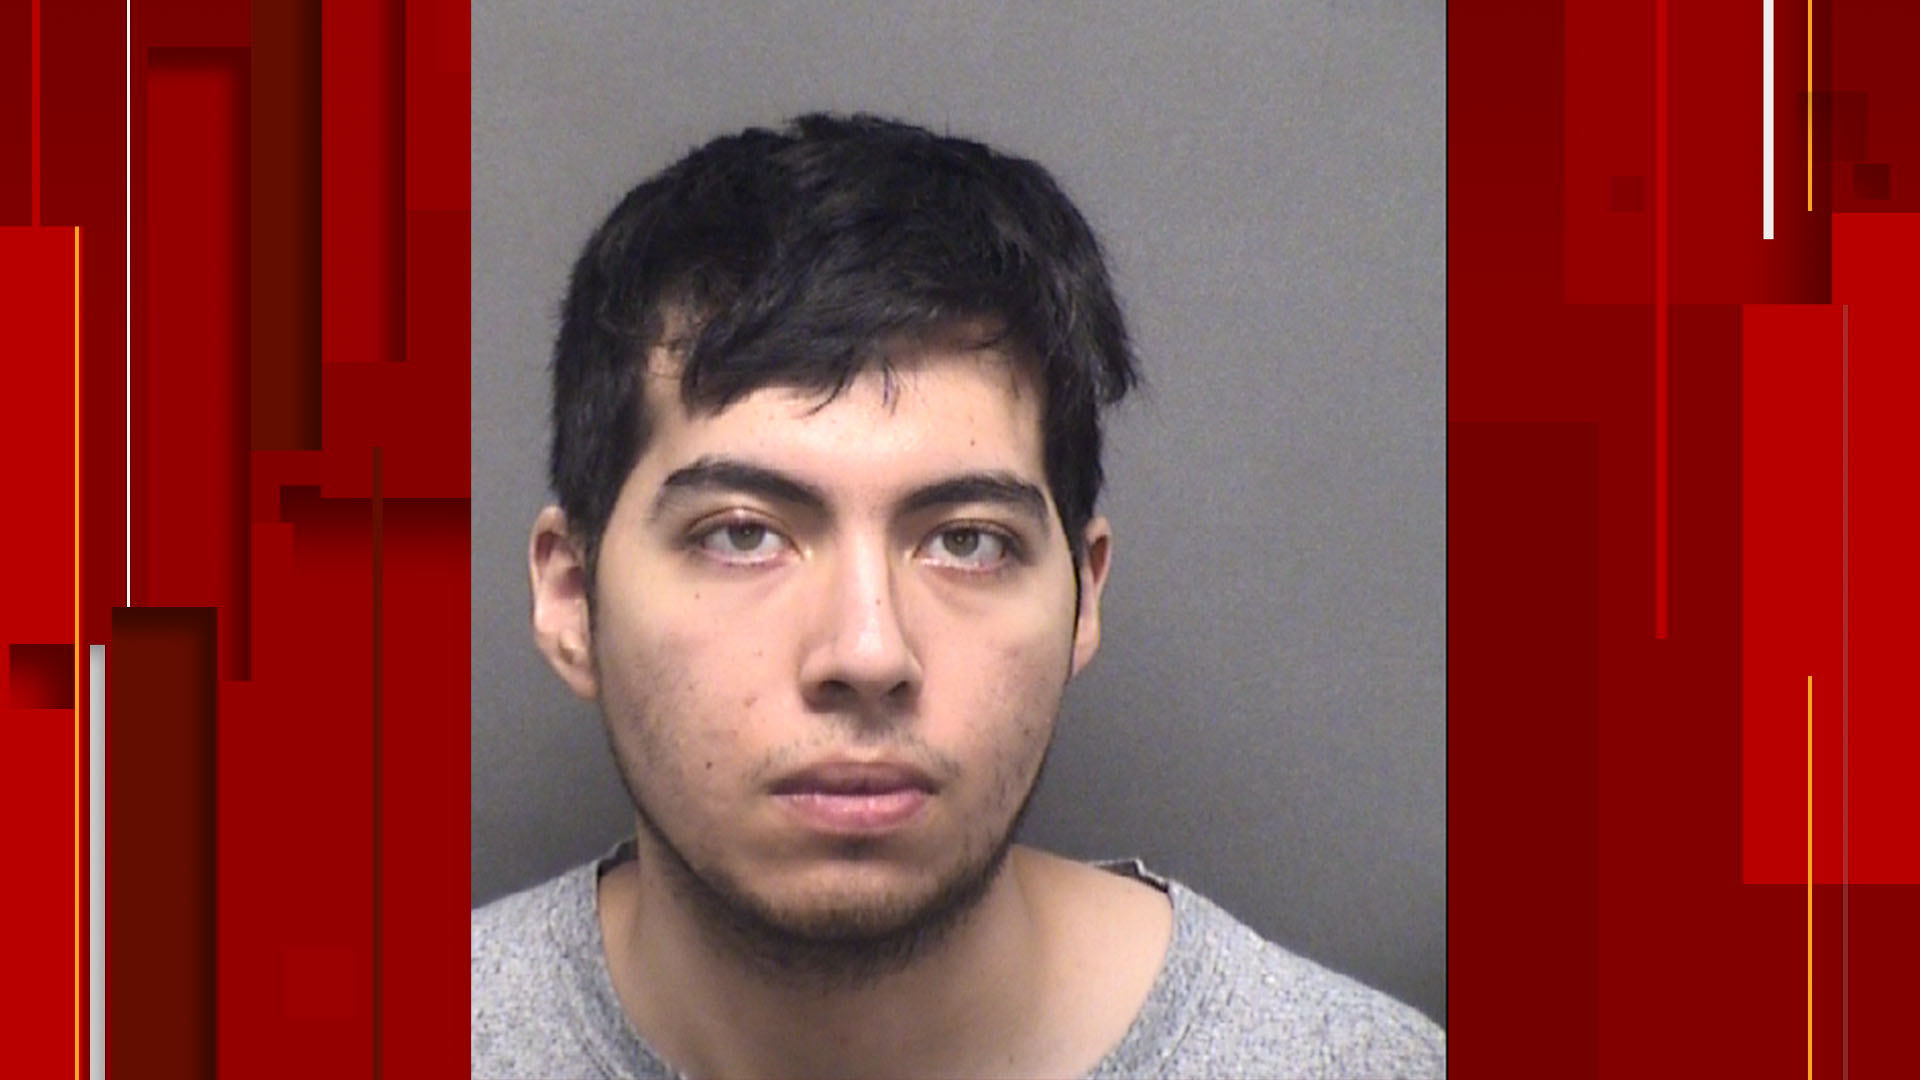 San Antonio man arrested for possessing child porn on Snapchat, records show